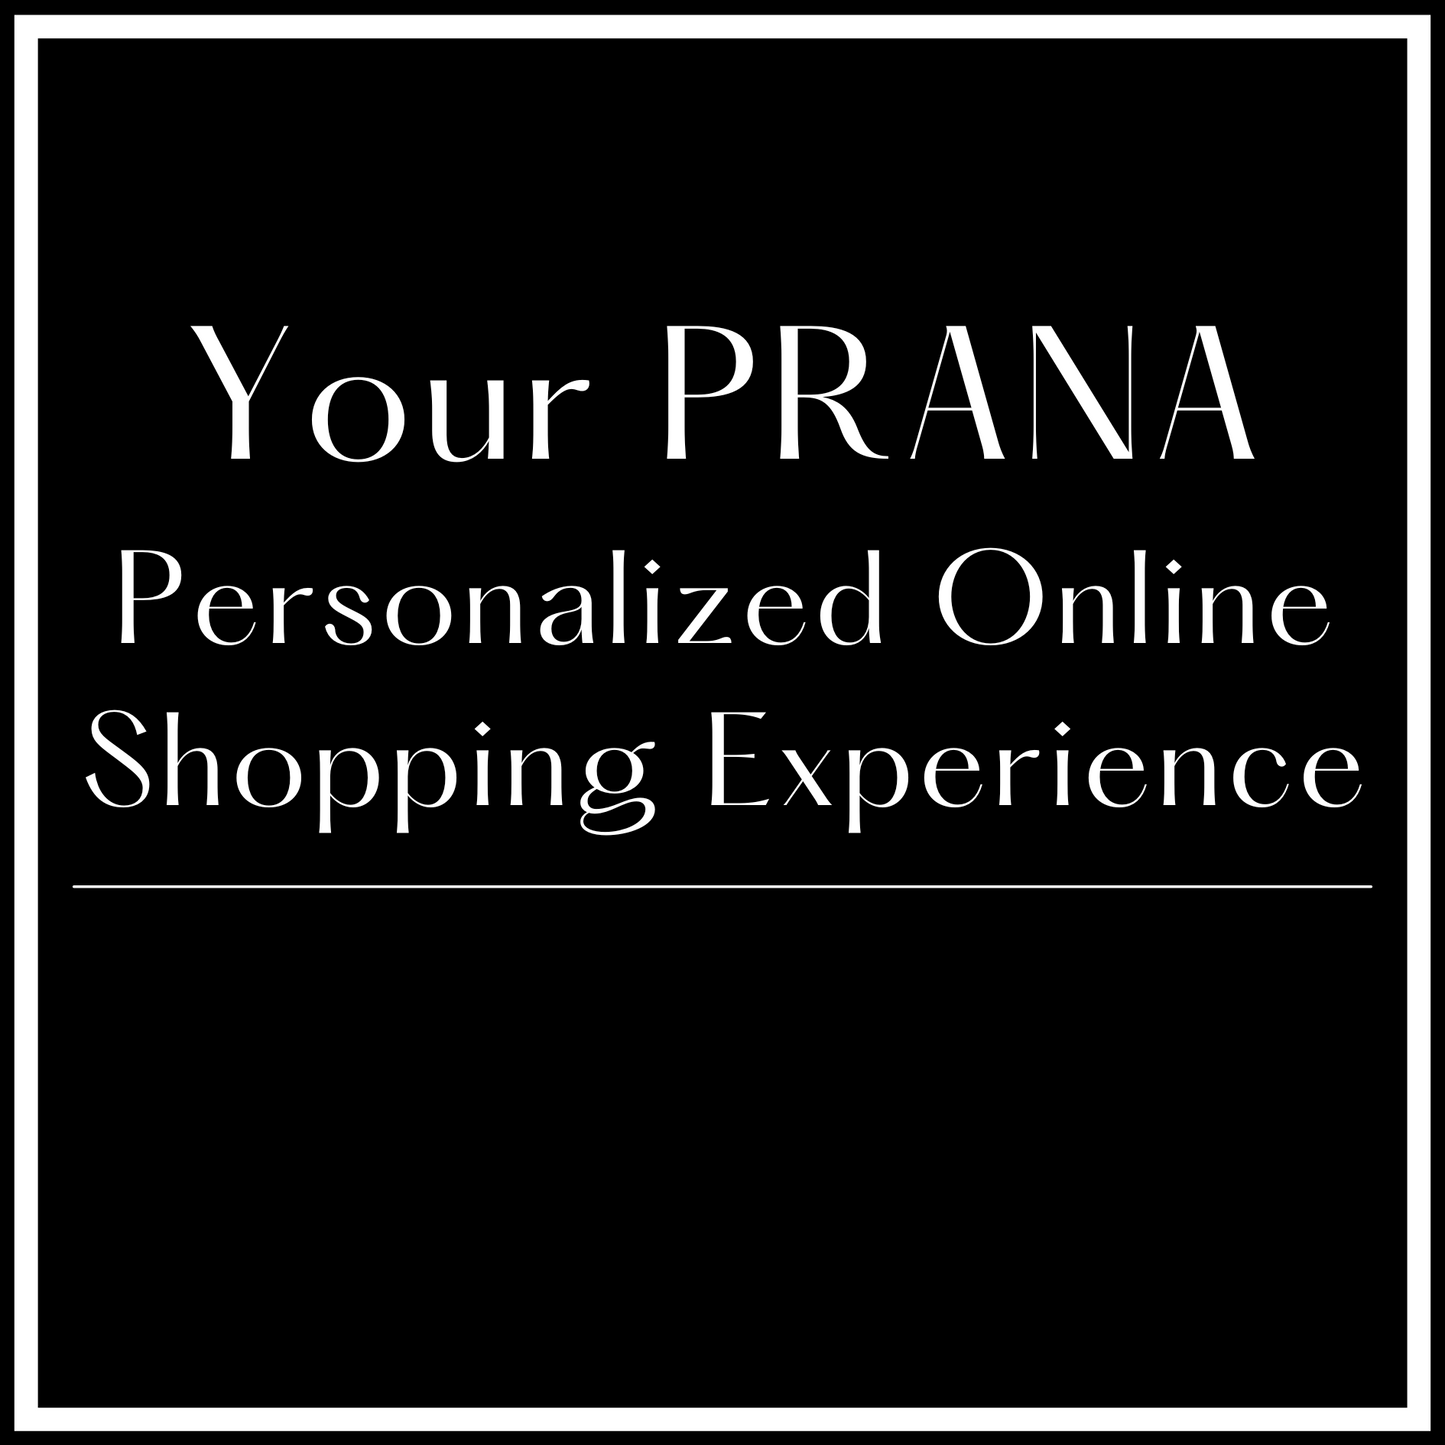 Personalized Online Shopping